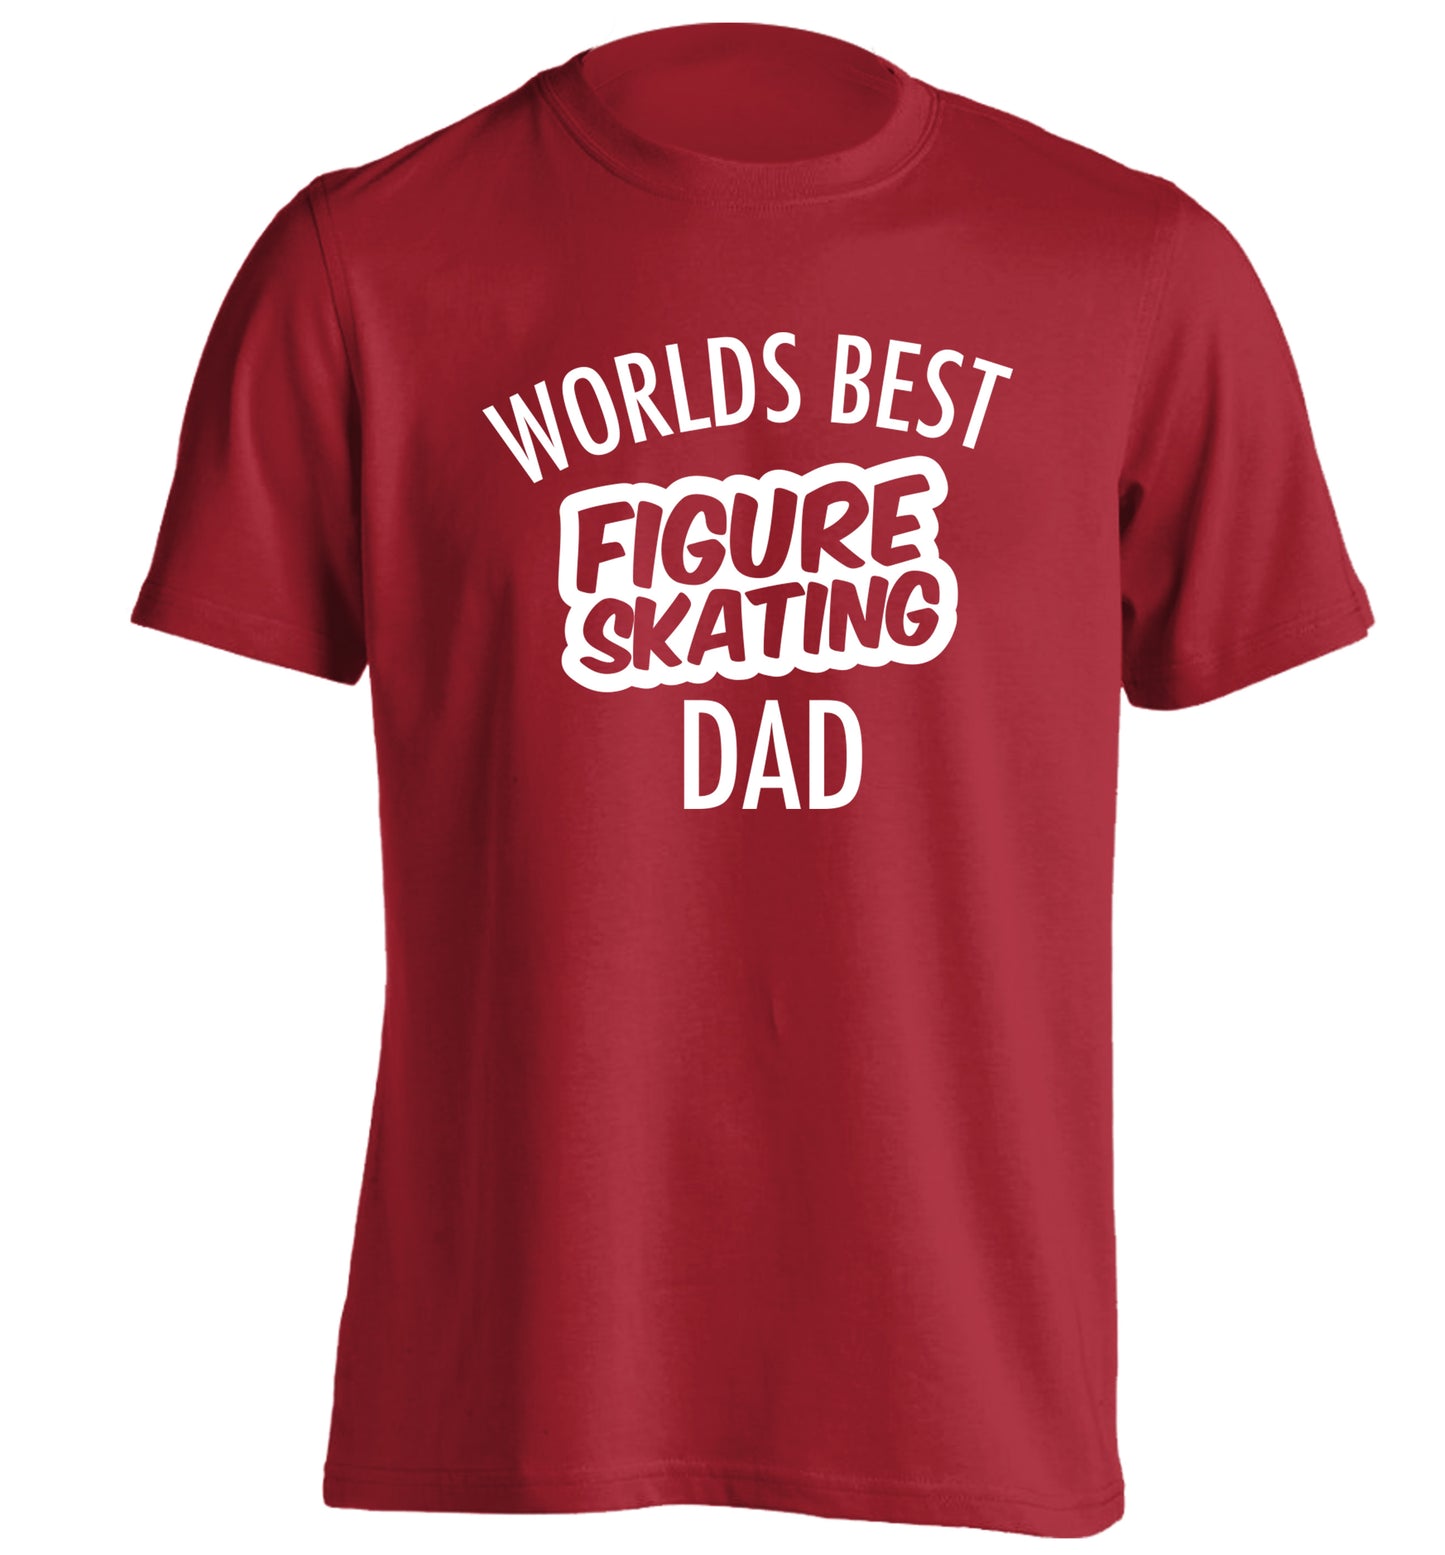 Worlds best figure skating dad adults unisexred Tshirt 2XL